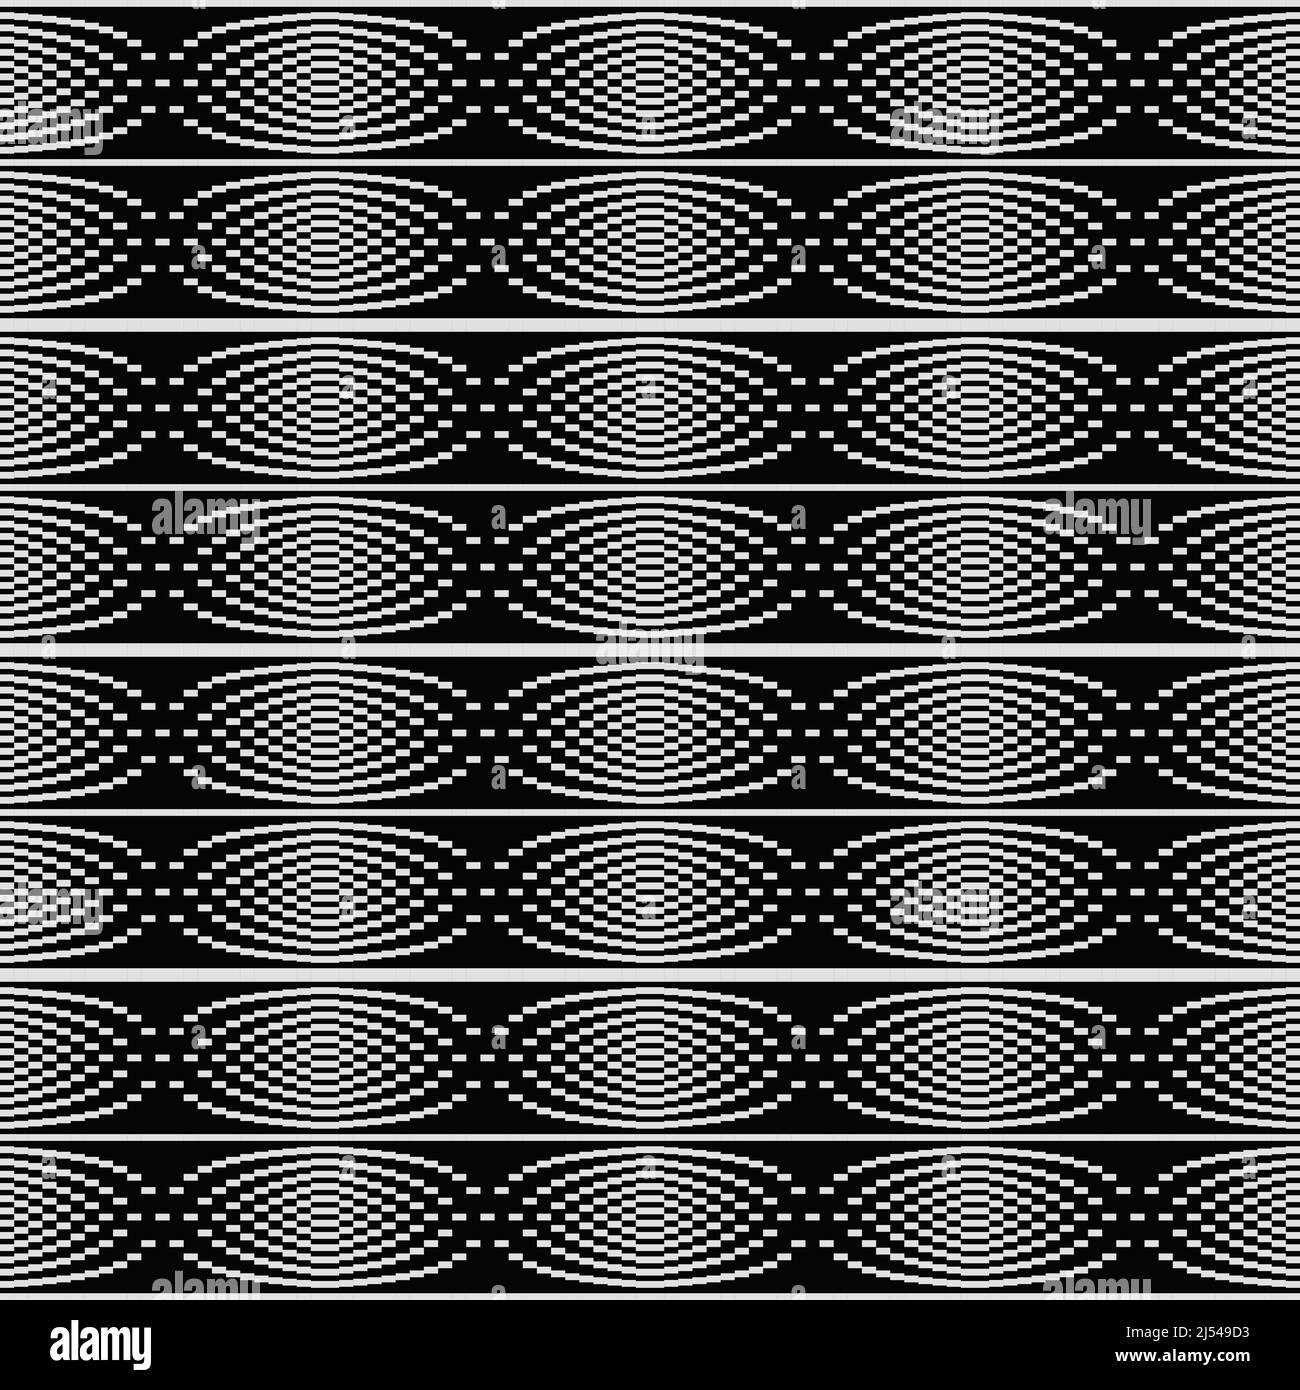 Abstract monochrome vector graphics with digital transition effect. Brutalist style futuristic pattern built with distorted geometric shapes. Stock Vector